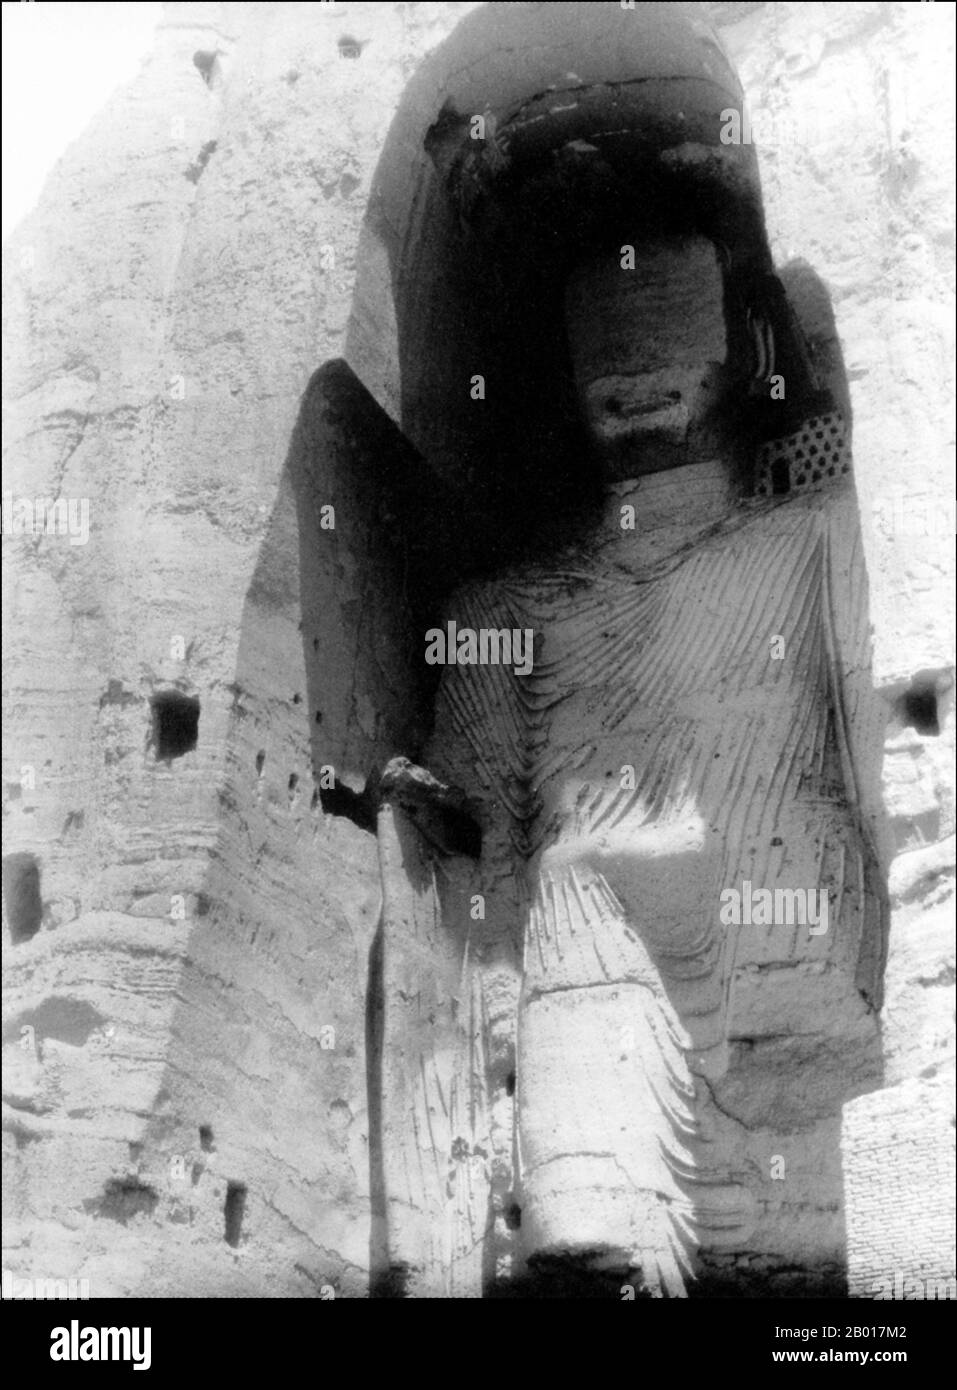 Afghanistan: The Great Buddha at Bamiyan, photographed by Robert Byron (26 Febraury 1905 - 24 February 1941) in 1934 and destroyed by Taliban zealots in 2001.  The Buddhas of Bamiyan were two 6th century monumental statues of standing Buddhas carved into the side of a cliff in the Bamiyan valley in the Hazarajat region of central Afghanistan, situated 230 km (143 miles) northwest of Kabul at an altitude of 2,500 m (8,202 ft).  Built in 507 CE, the larger in 554 CE, the statues represented the classic blended style of Gandhara art. The main bodies were hewn directly from the sandstone cliffs. Stock Photo